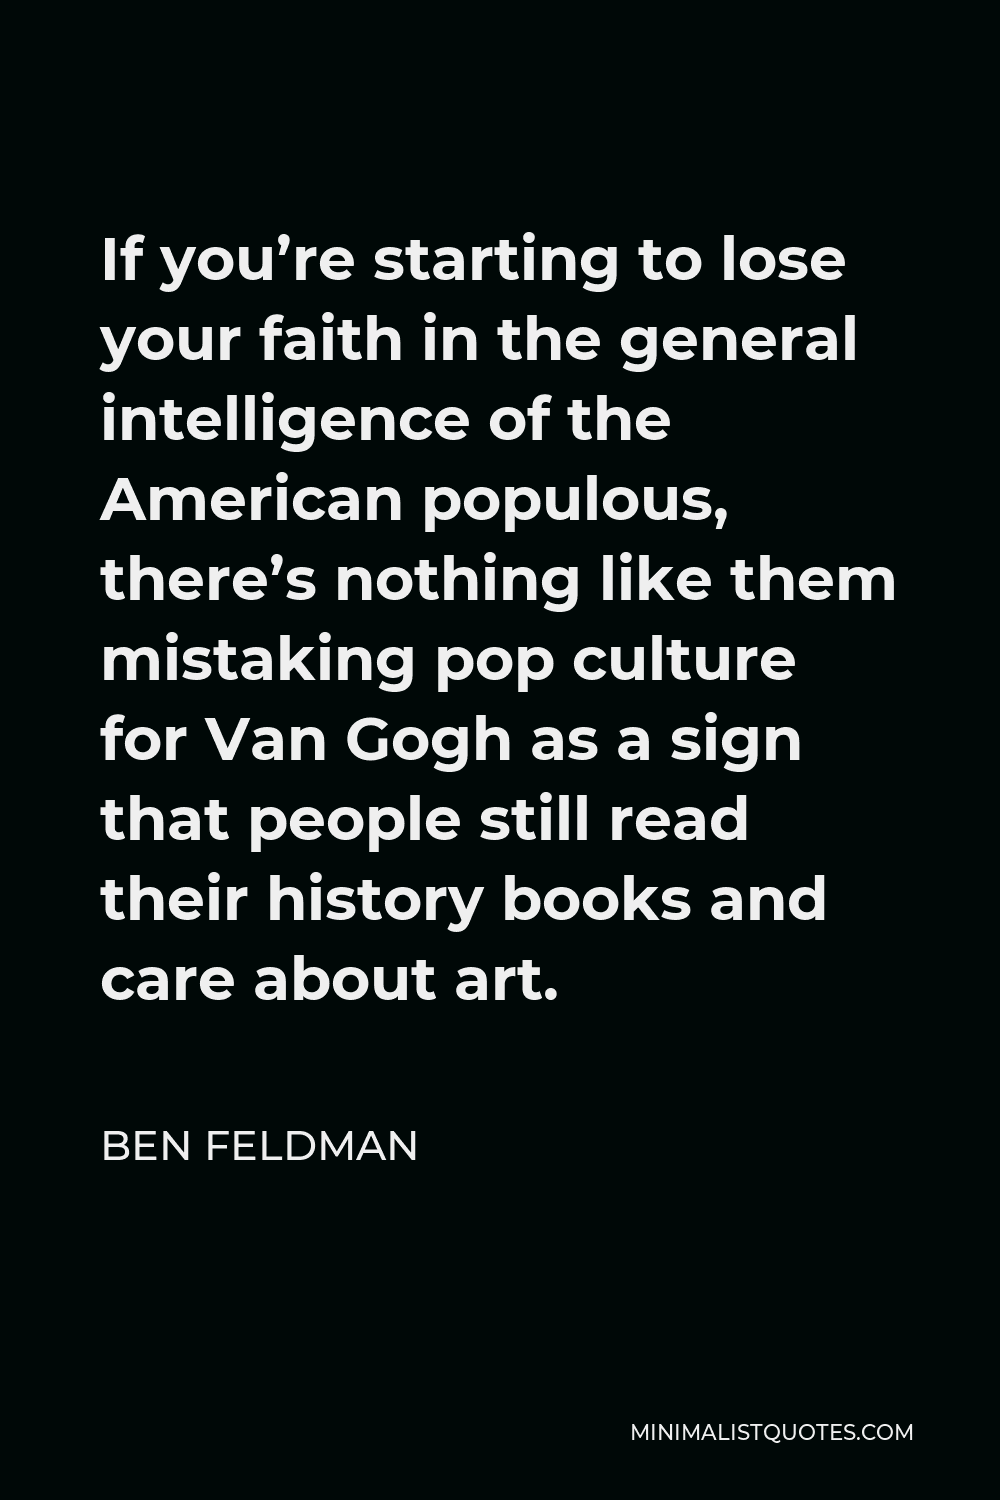 Ben Feldman Quote - If you’re starting to lose your faith in the general intelligence of the American populous, there’s nothing like them mistaking pop culture for Van Gogh as a sign that people still read their history books and care about art.